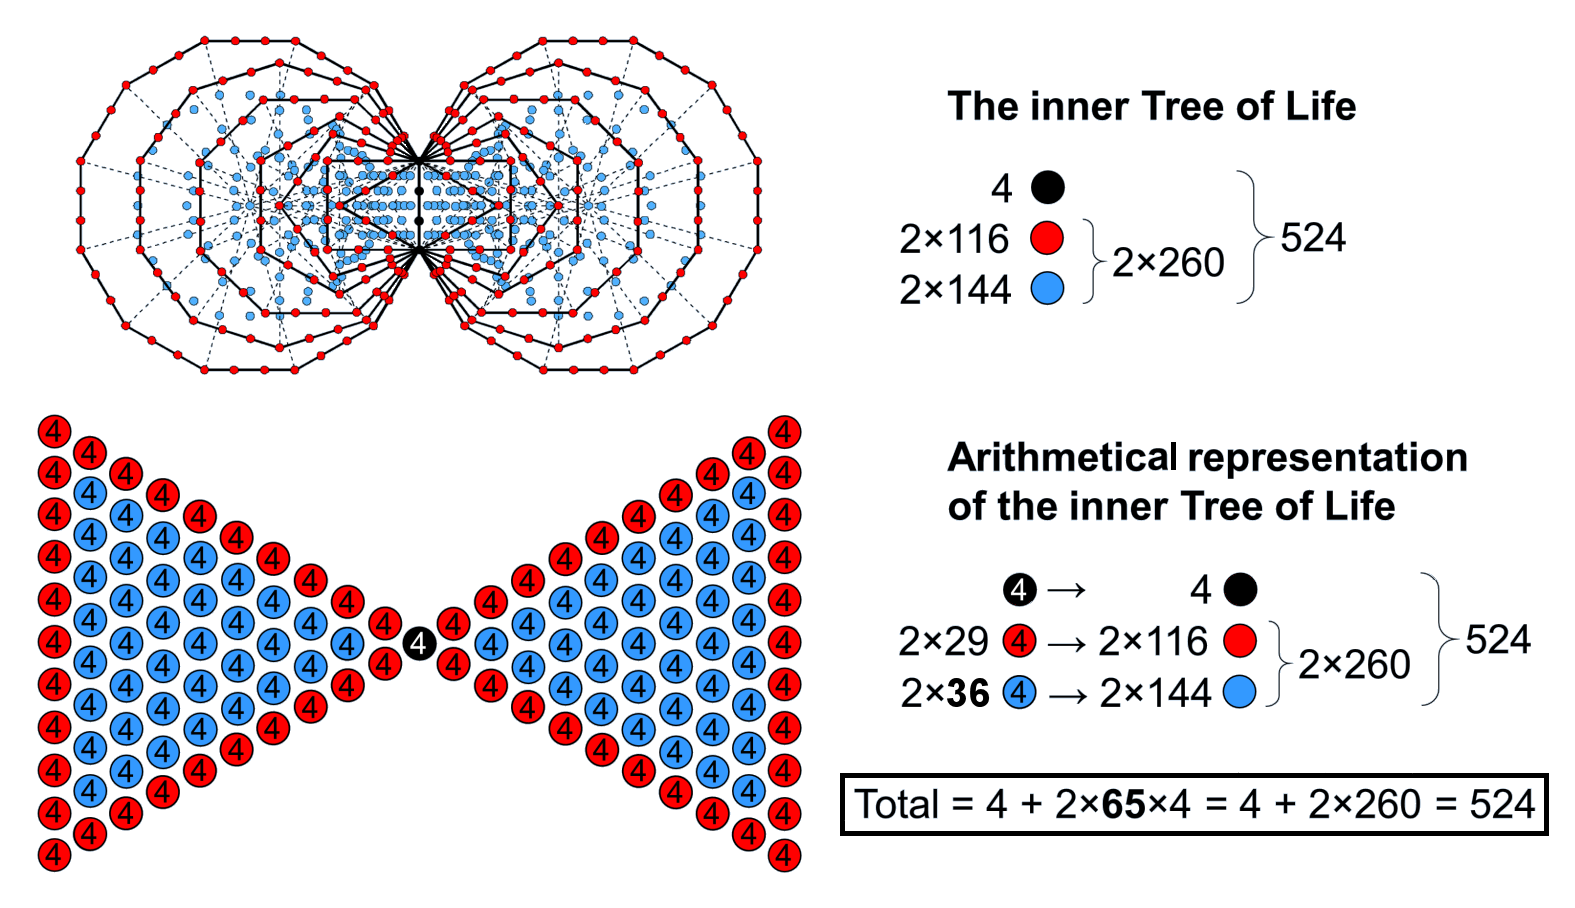 Arithmetic counterpart of the inner Tree of Life